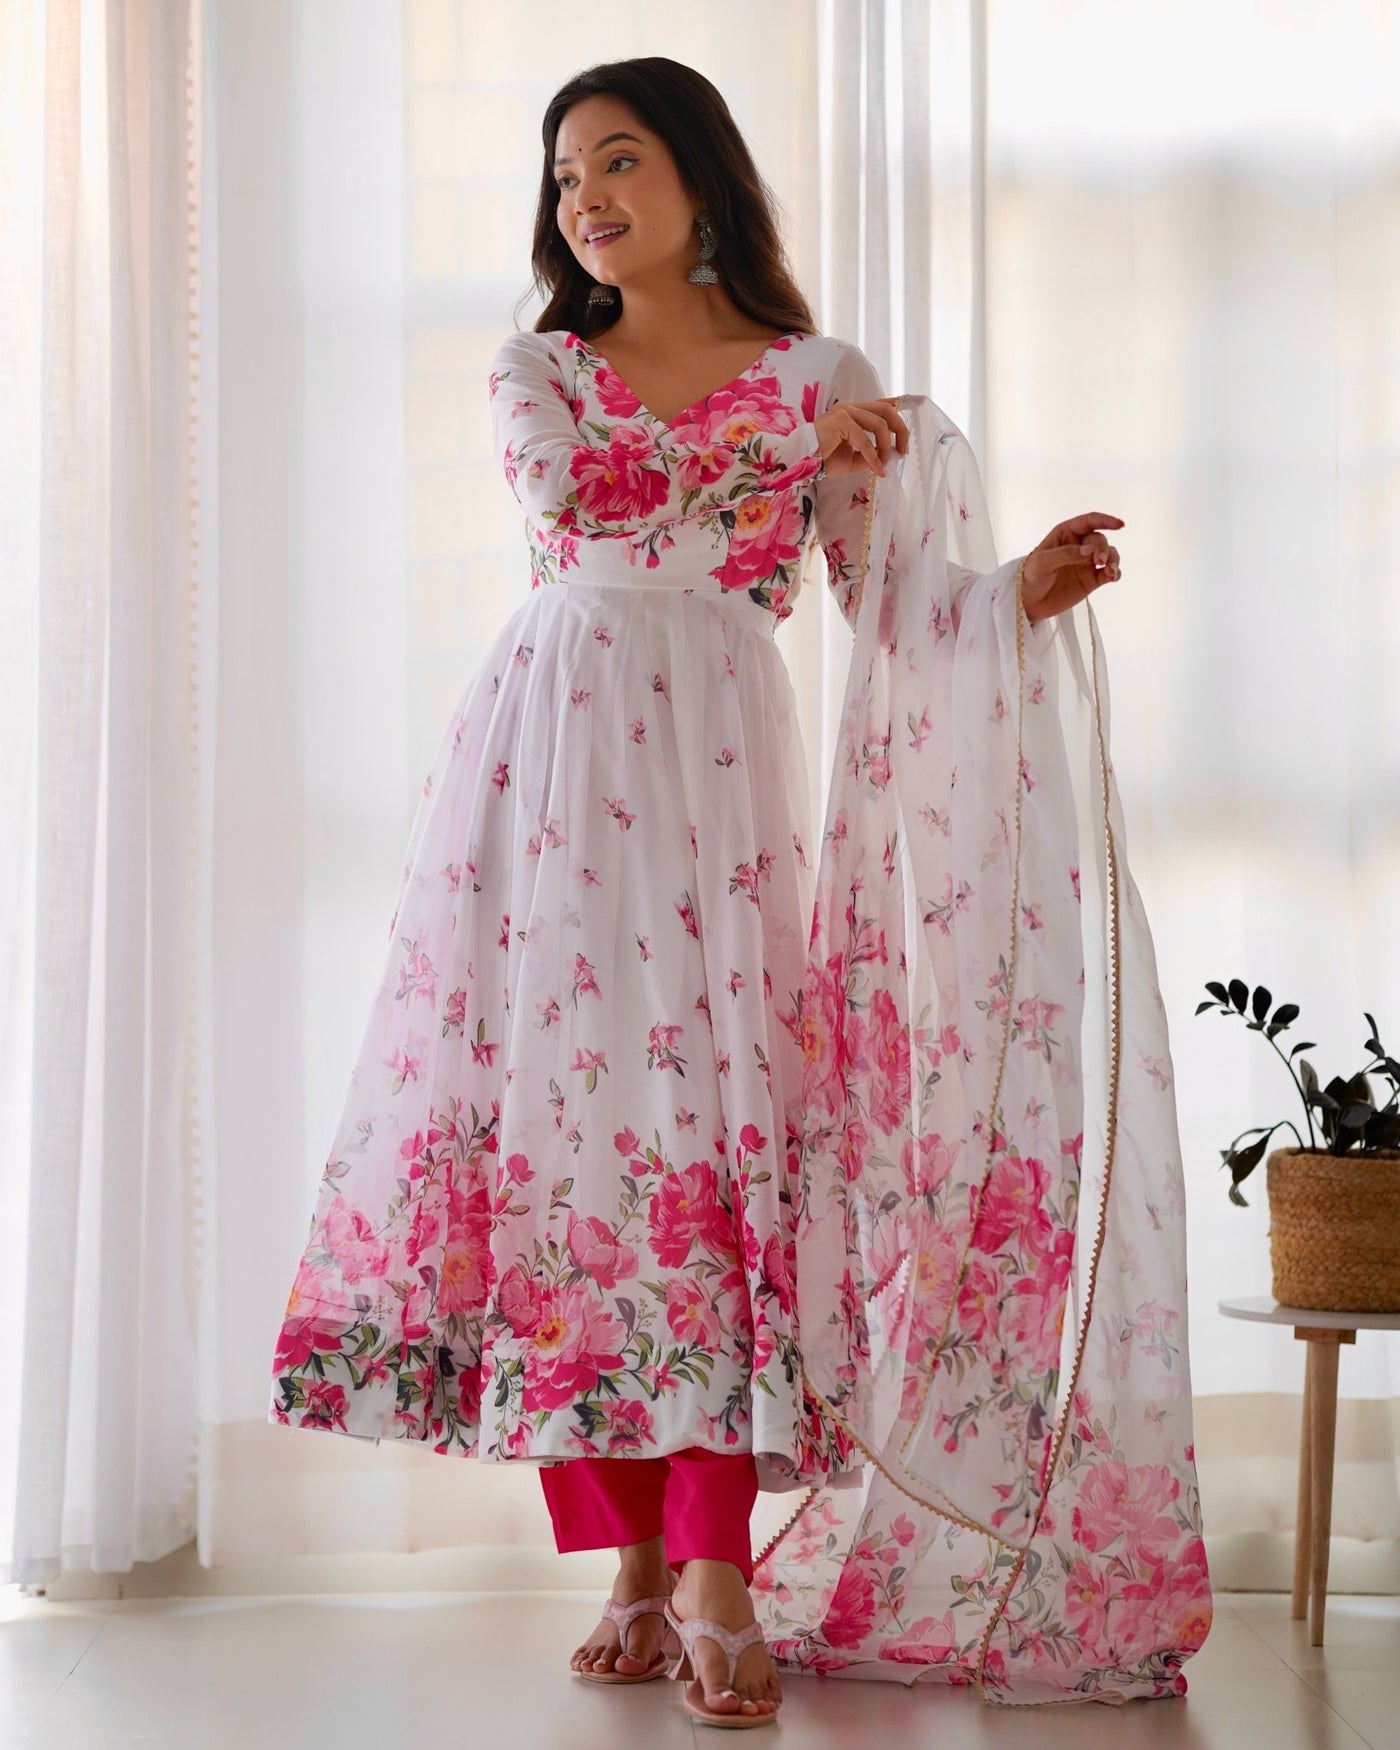 Digitally Printed Pure Organza Anarkali Suit With Huge Flair Comes With Duppatta & Pant - Almaari Fashion